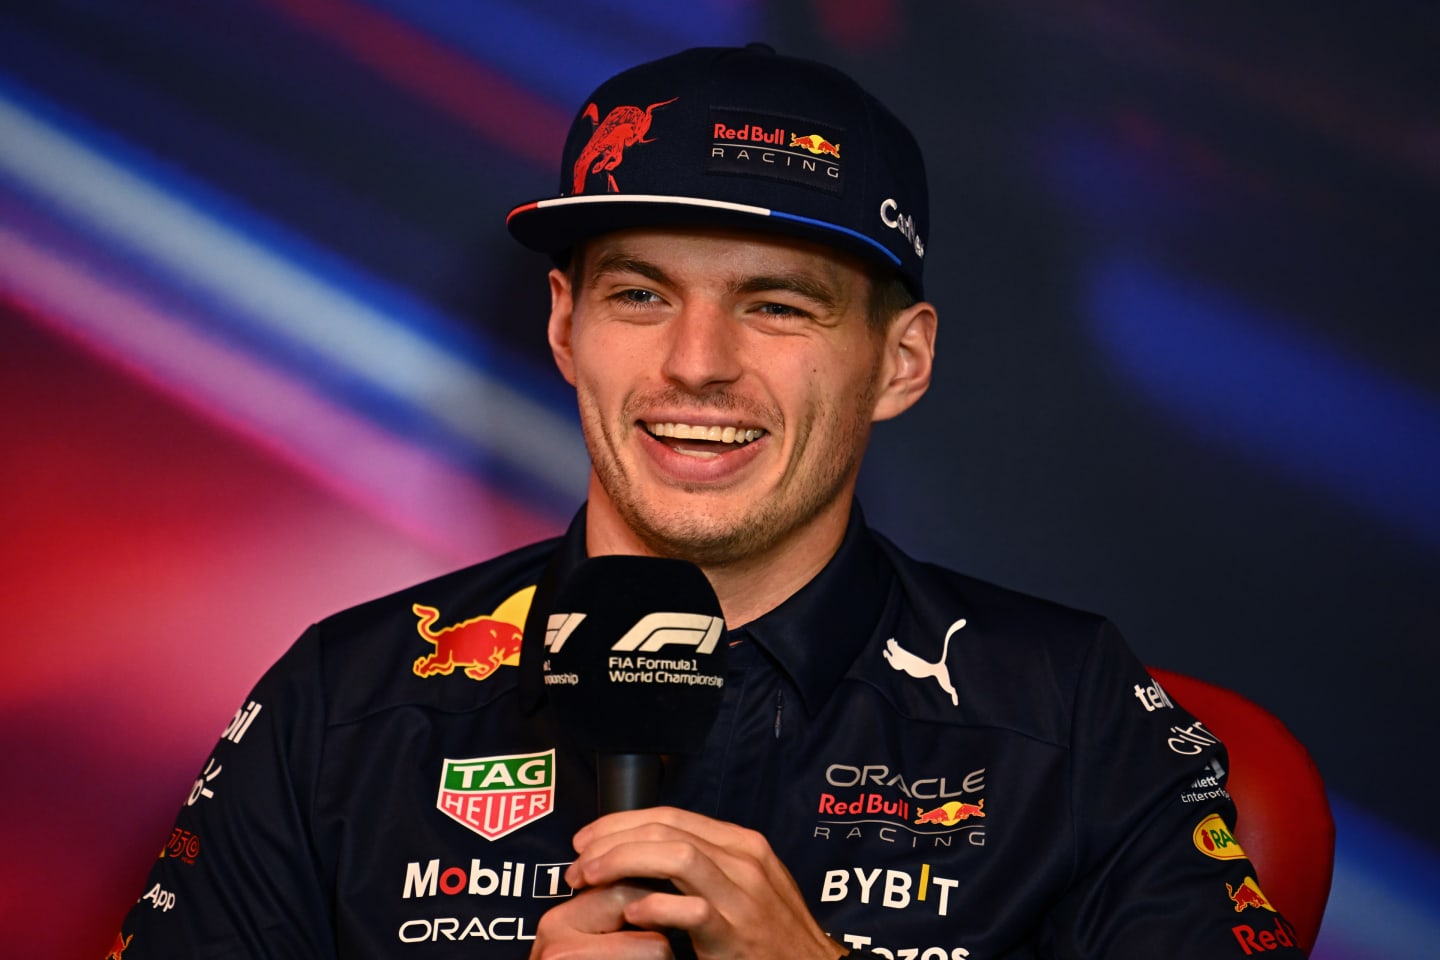 MONTREAL, QUEBEC - JUNE 17: Max Verstappen of the Netherlands and Oracle Red Bull Racing talks in the Drivers Press Conference prior to practice ahead of the F1 Grand Prix of Canada at Circuit Gilles Villeneuve on June 17, 2022 in Montreal, Quebec. (Photo by Clive Mason/Getty Images)